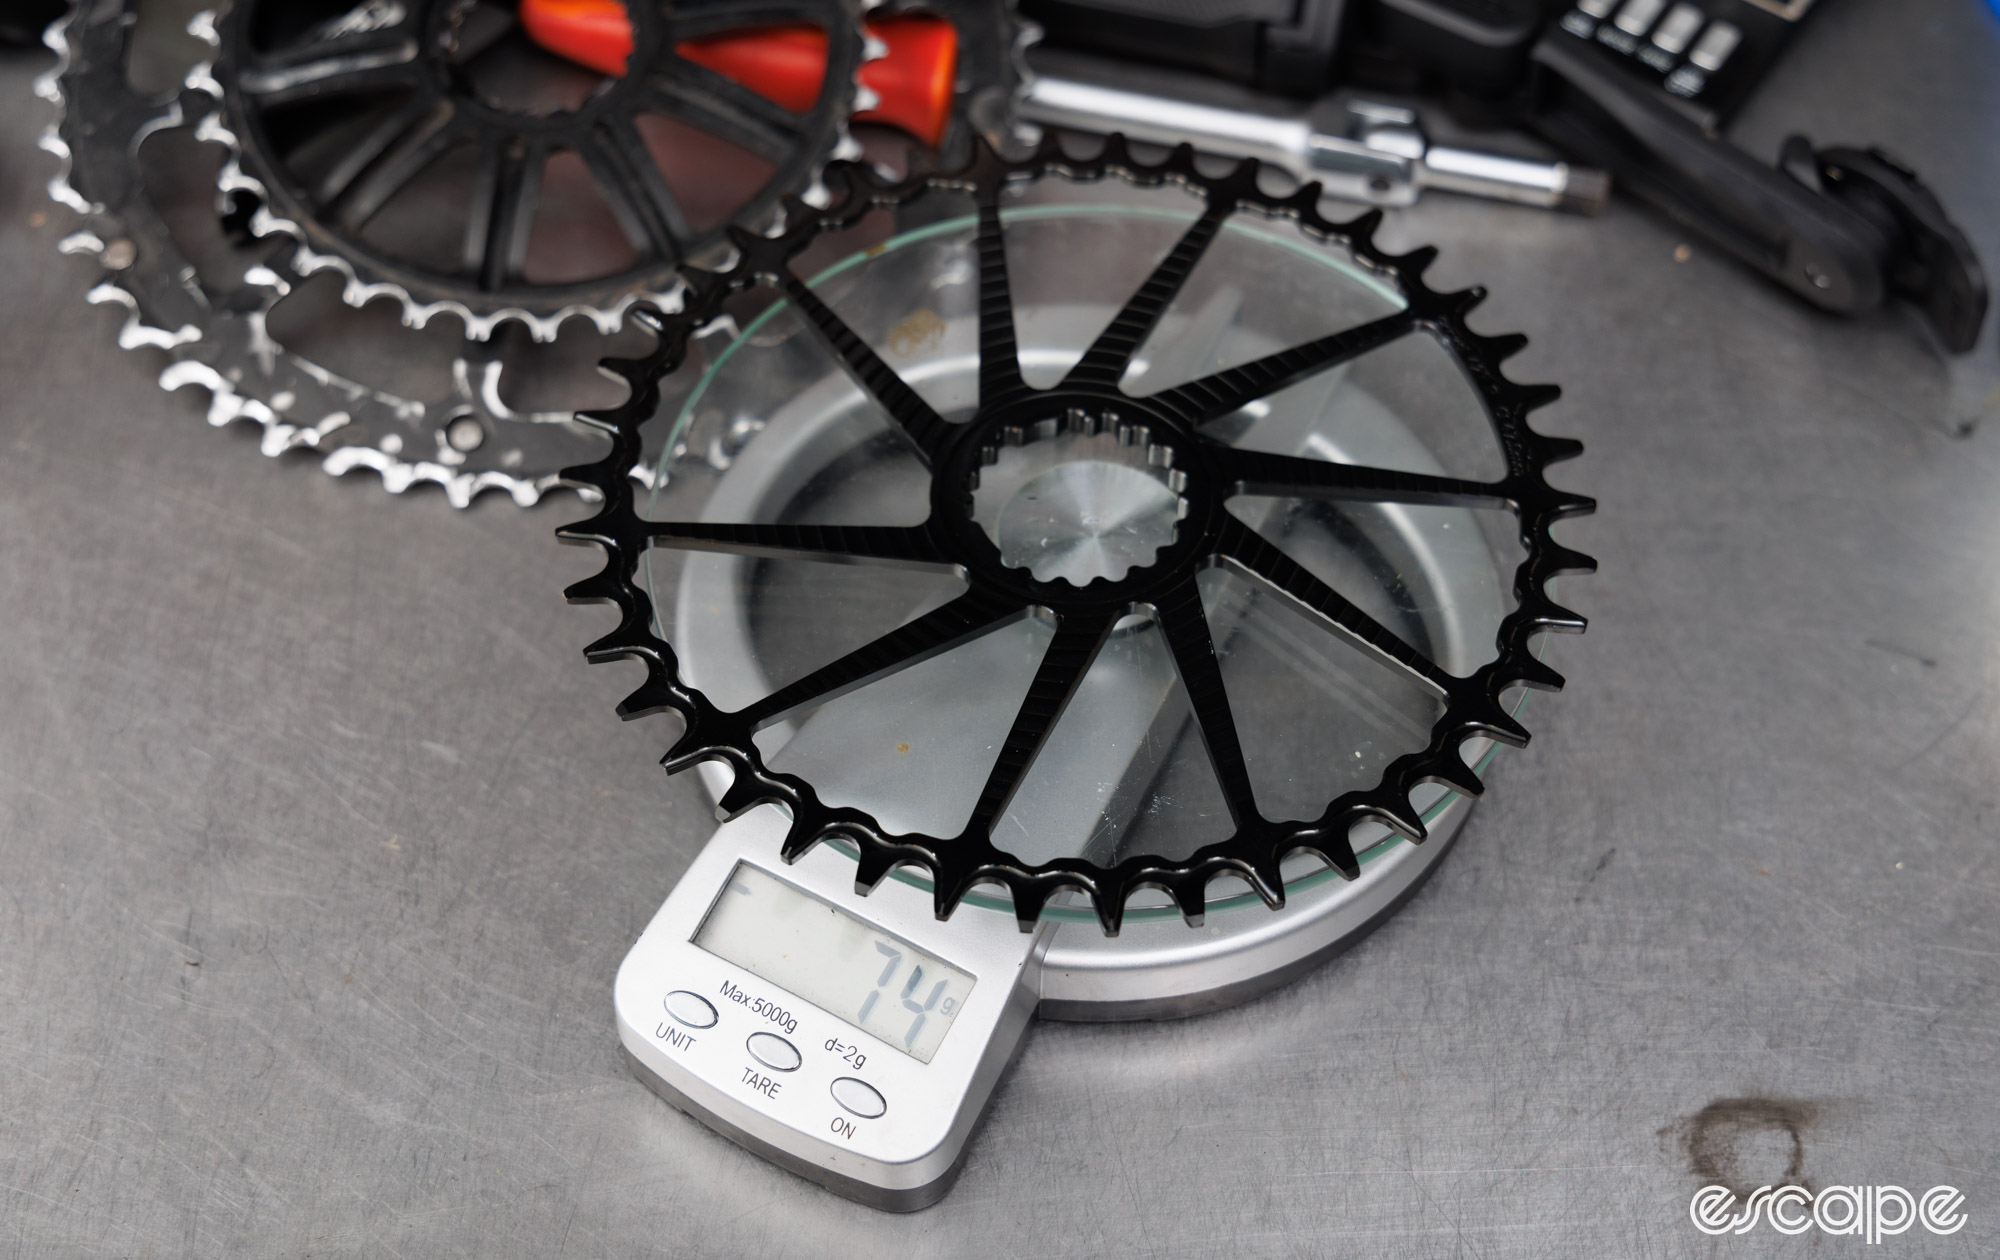 42T Garbaruk DM round chainring on a scale that reads 74 grams. 